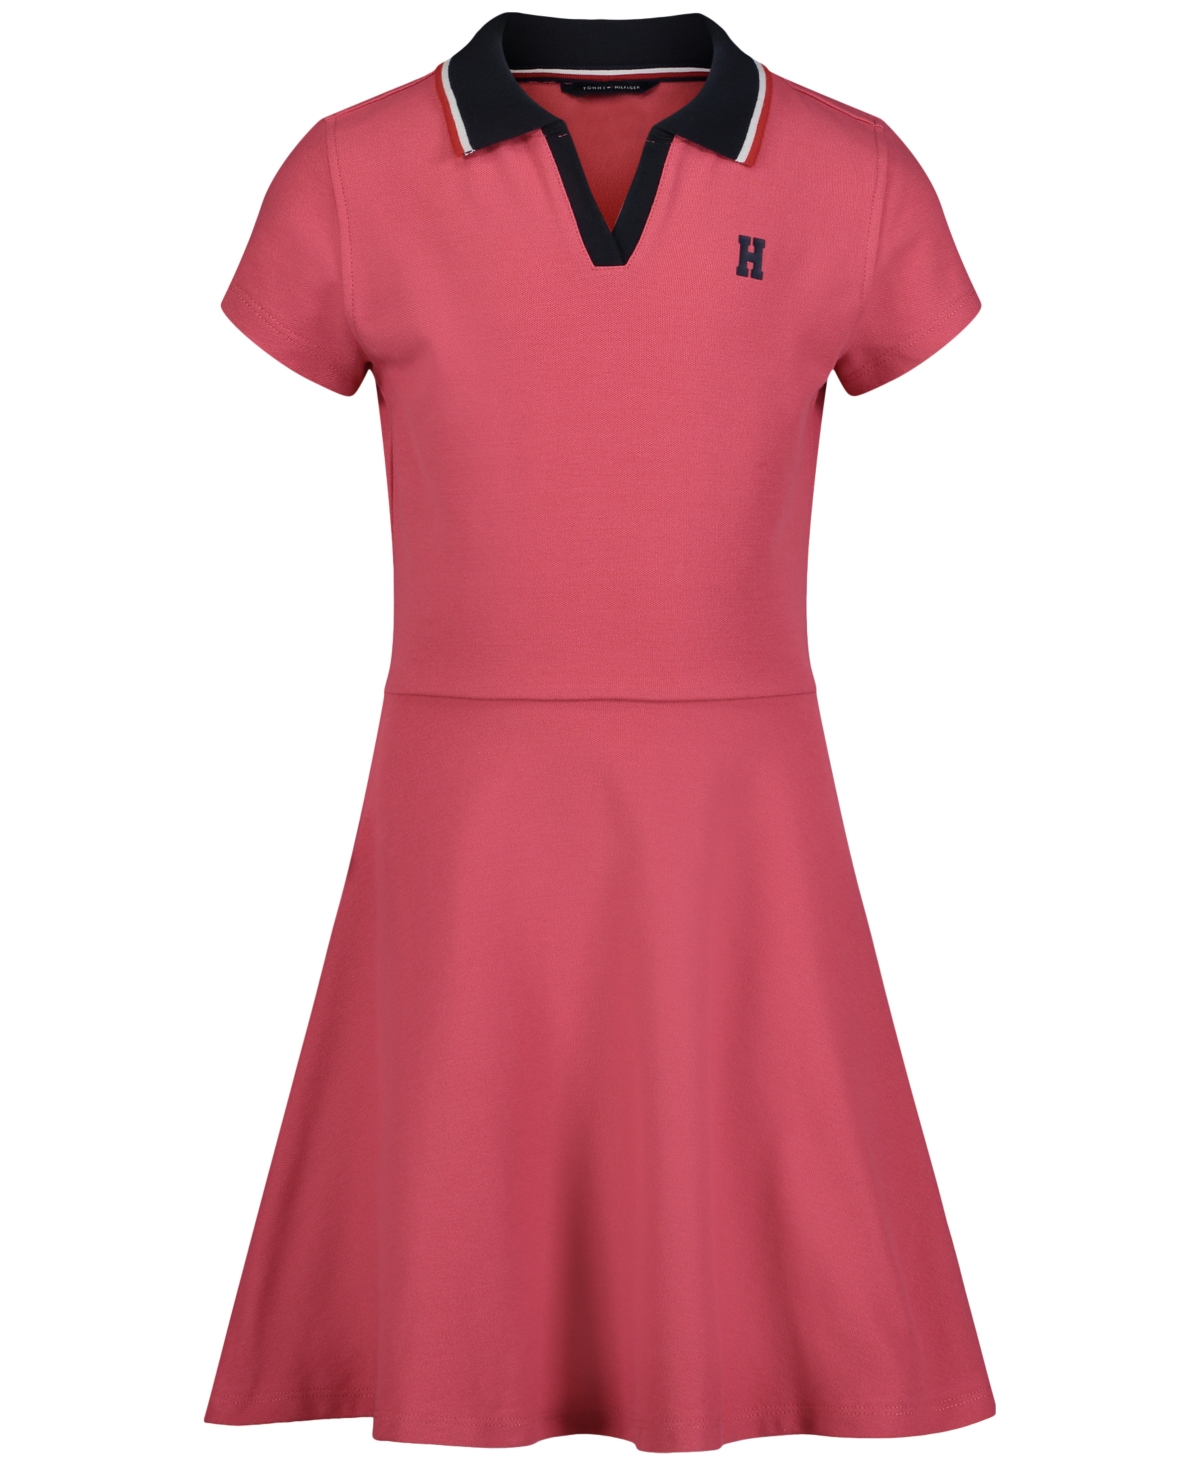 Tommy Hilfiger Kids' Big Girls Johnny Collar Polo Dress In Holly Berr